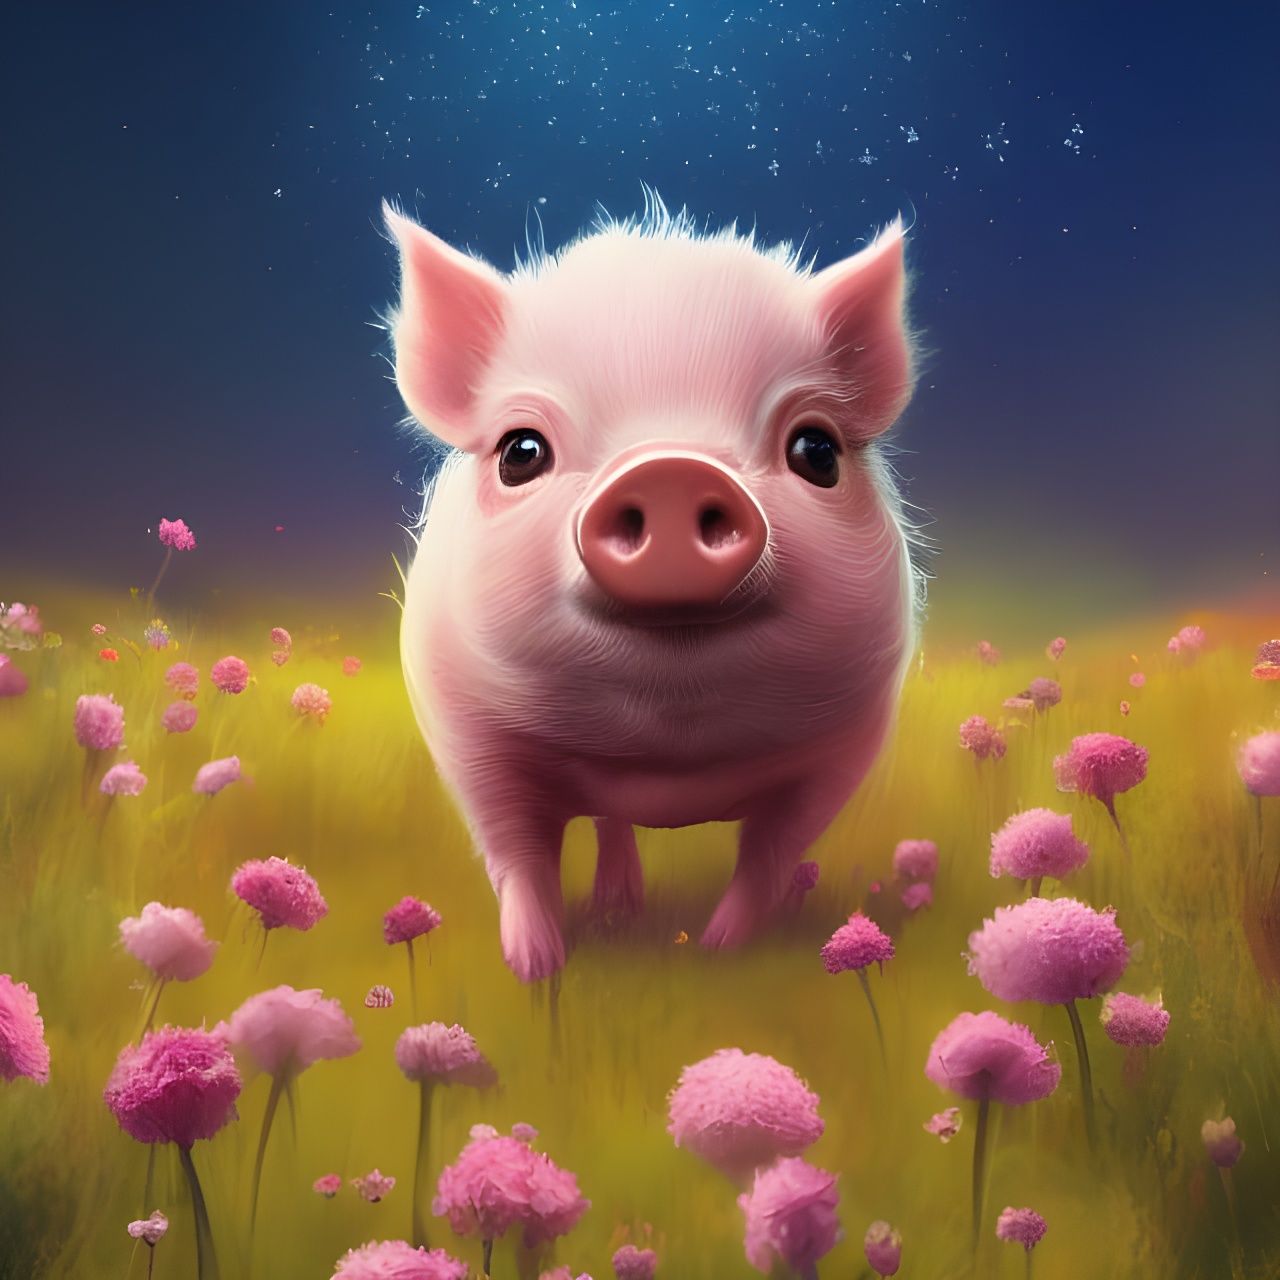 Cute Pig Black Wallpapers - Funny Pig Wallpapers for iPhone 4k